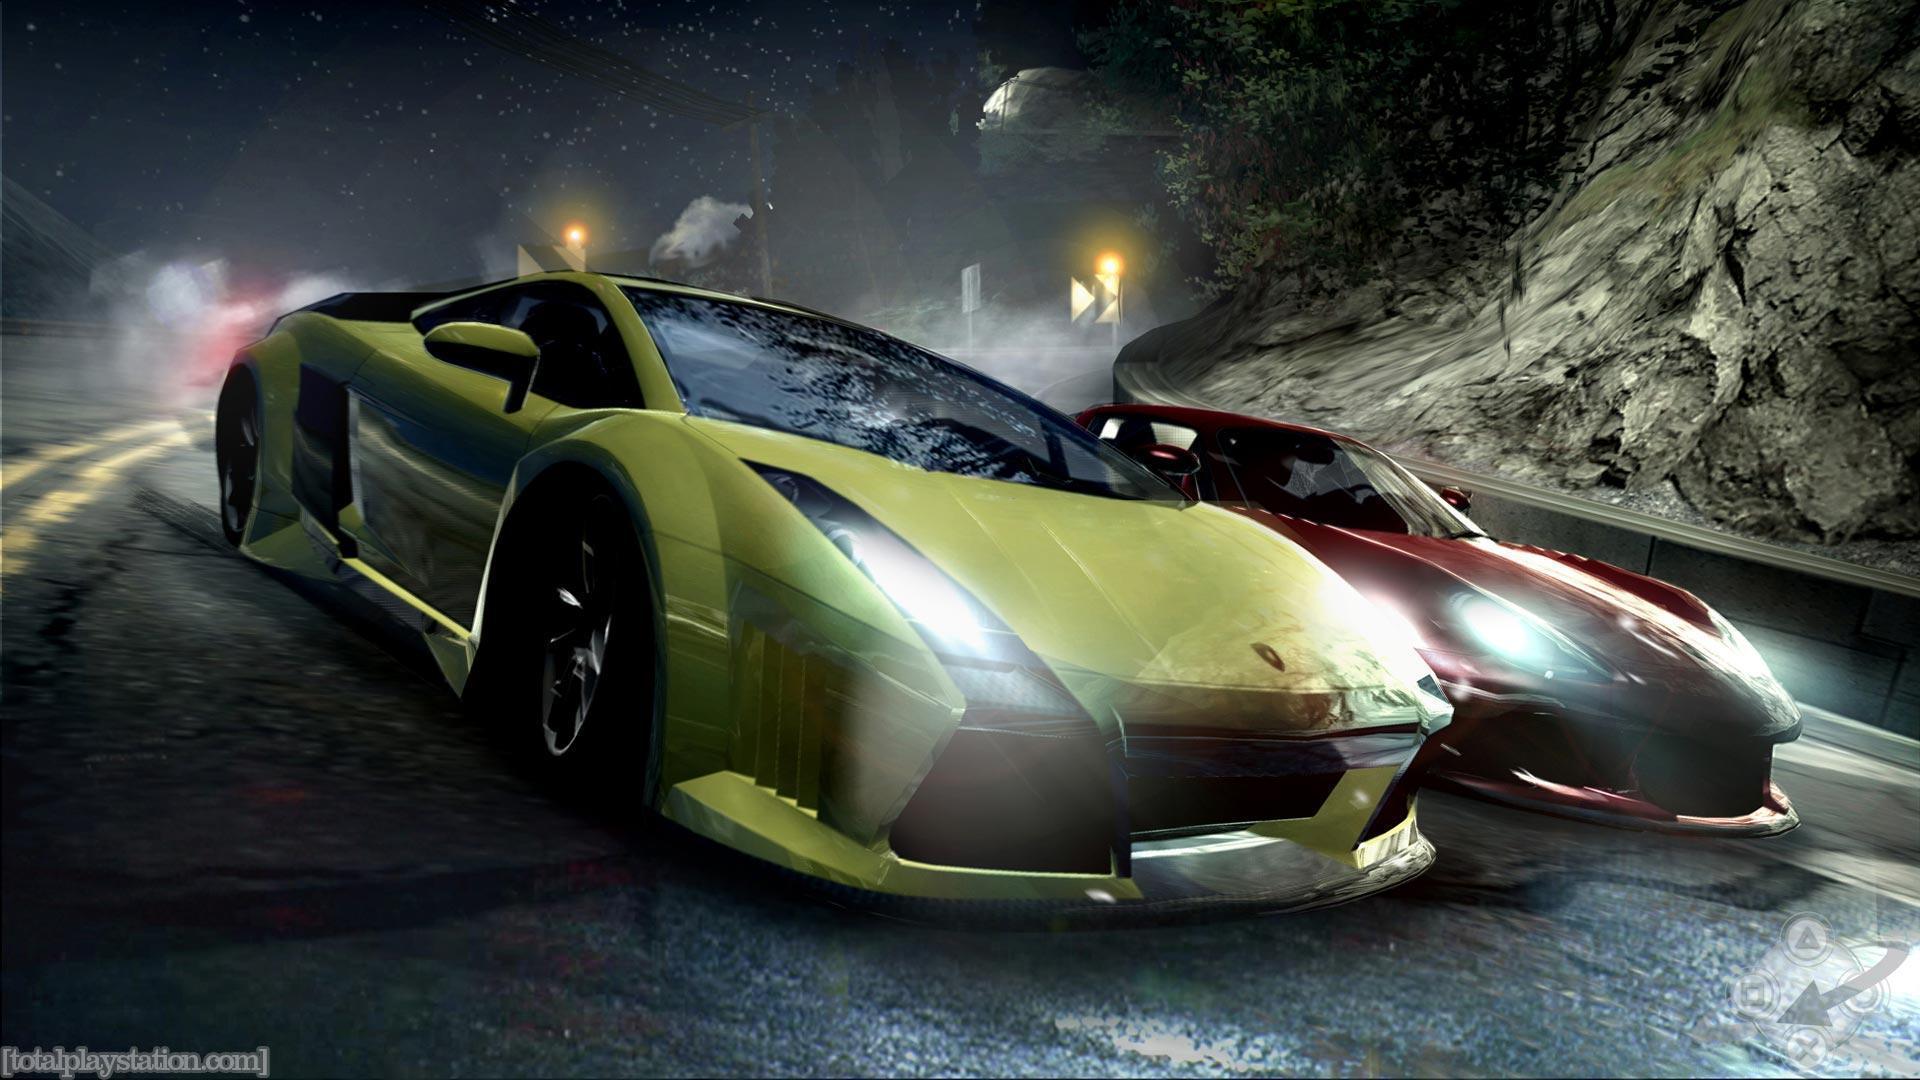 Need For Speed Wallpaper 1080p